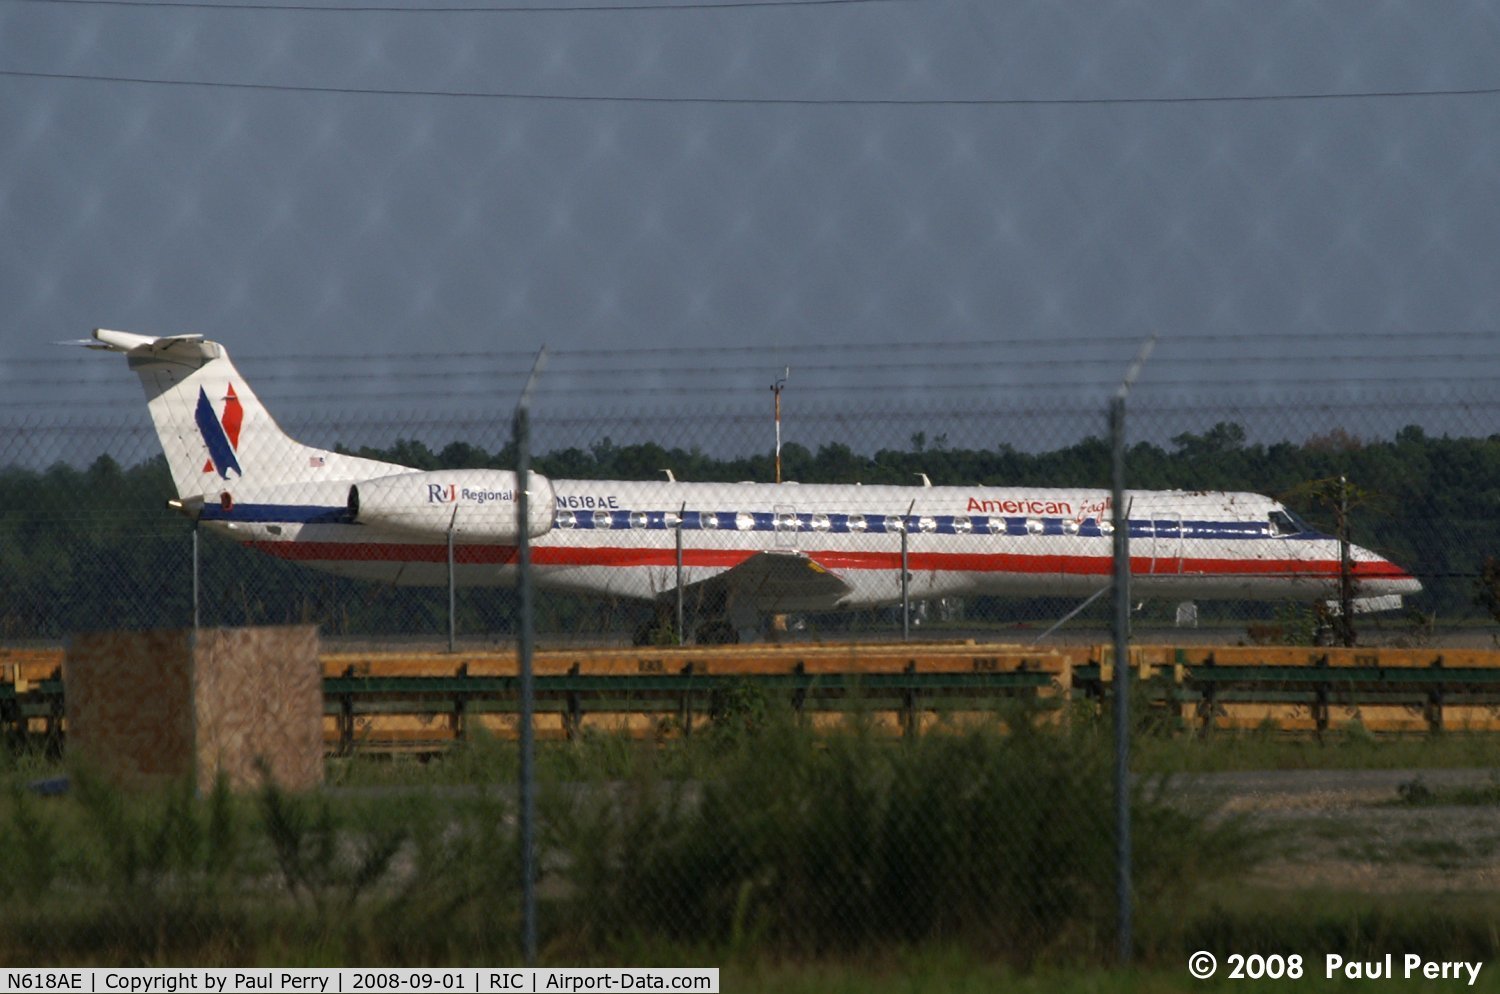 N618AE, 1998 Embraer ERJ-145LR (EMB-145LR) C/N 145097, Taxiing around, headed for the terminal